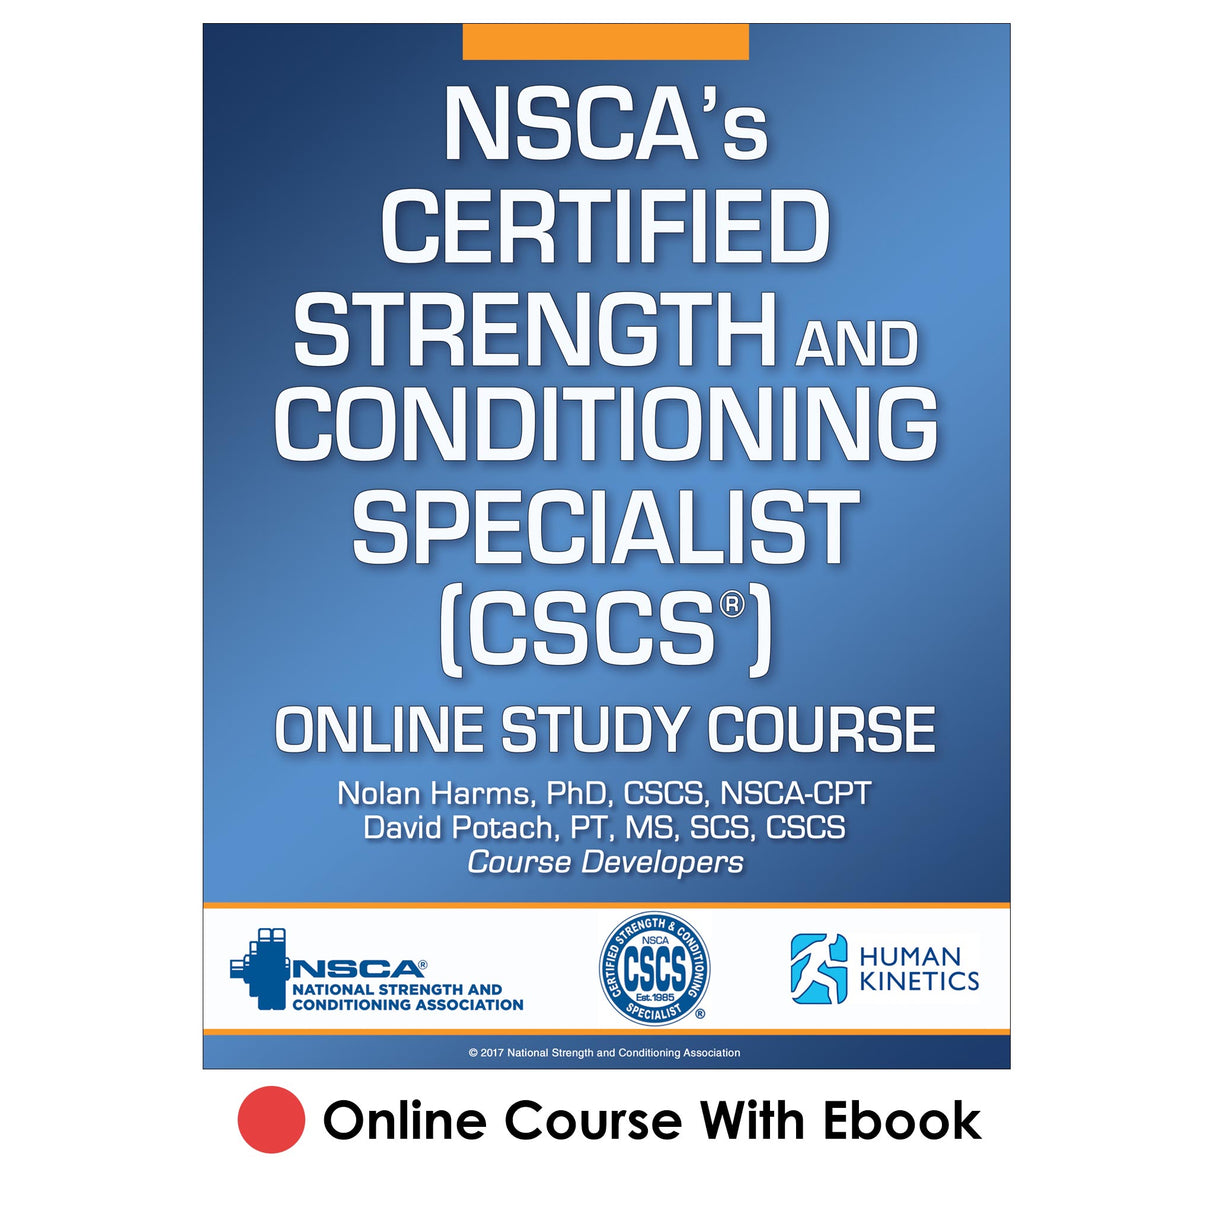 NSCA’s Certified Strength and Conditioning Specialist (CSCS) 4th Edition Online Study/CE Course With Ebook